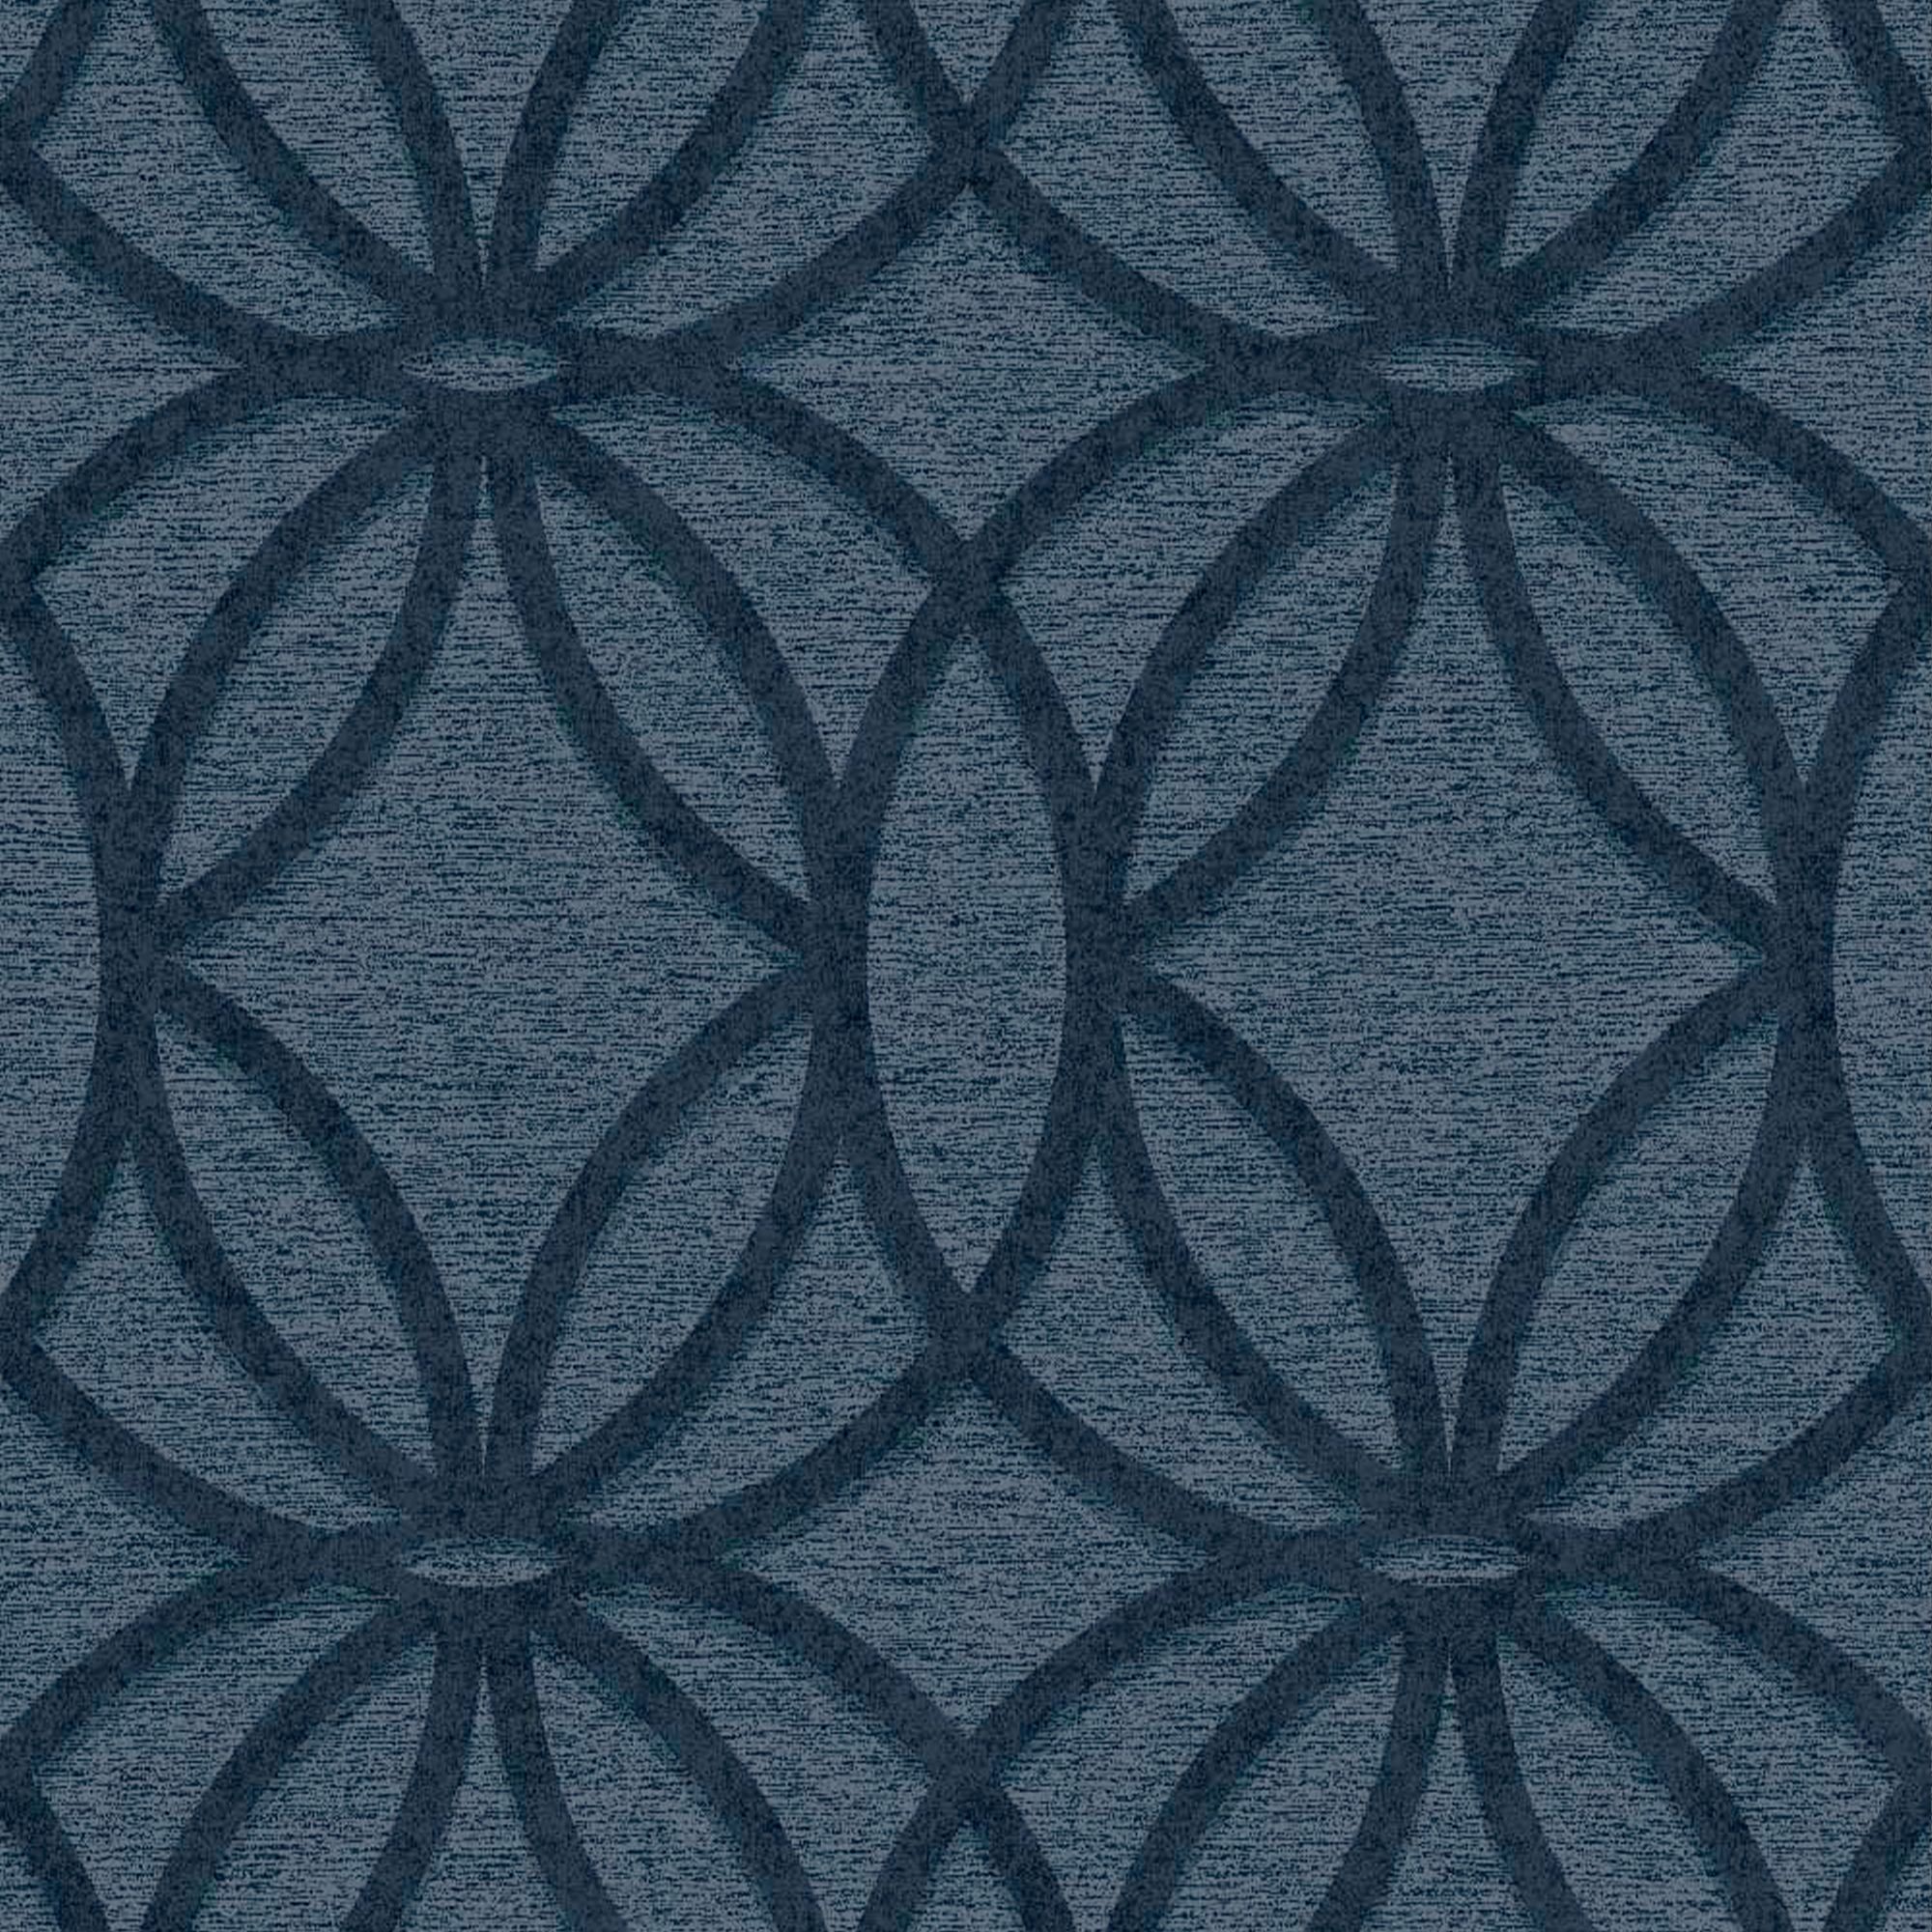 Next Luxe eclipse Navy Smooth Wallpaper